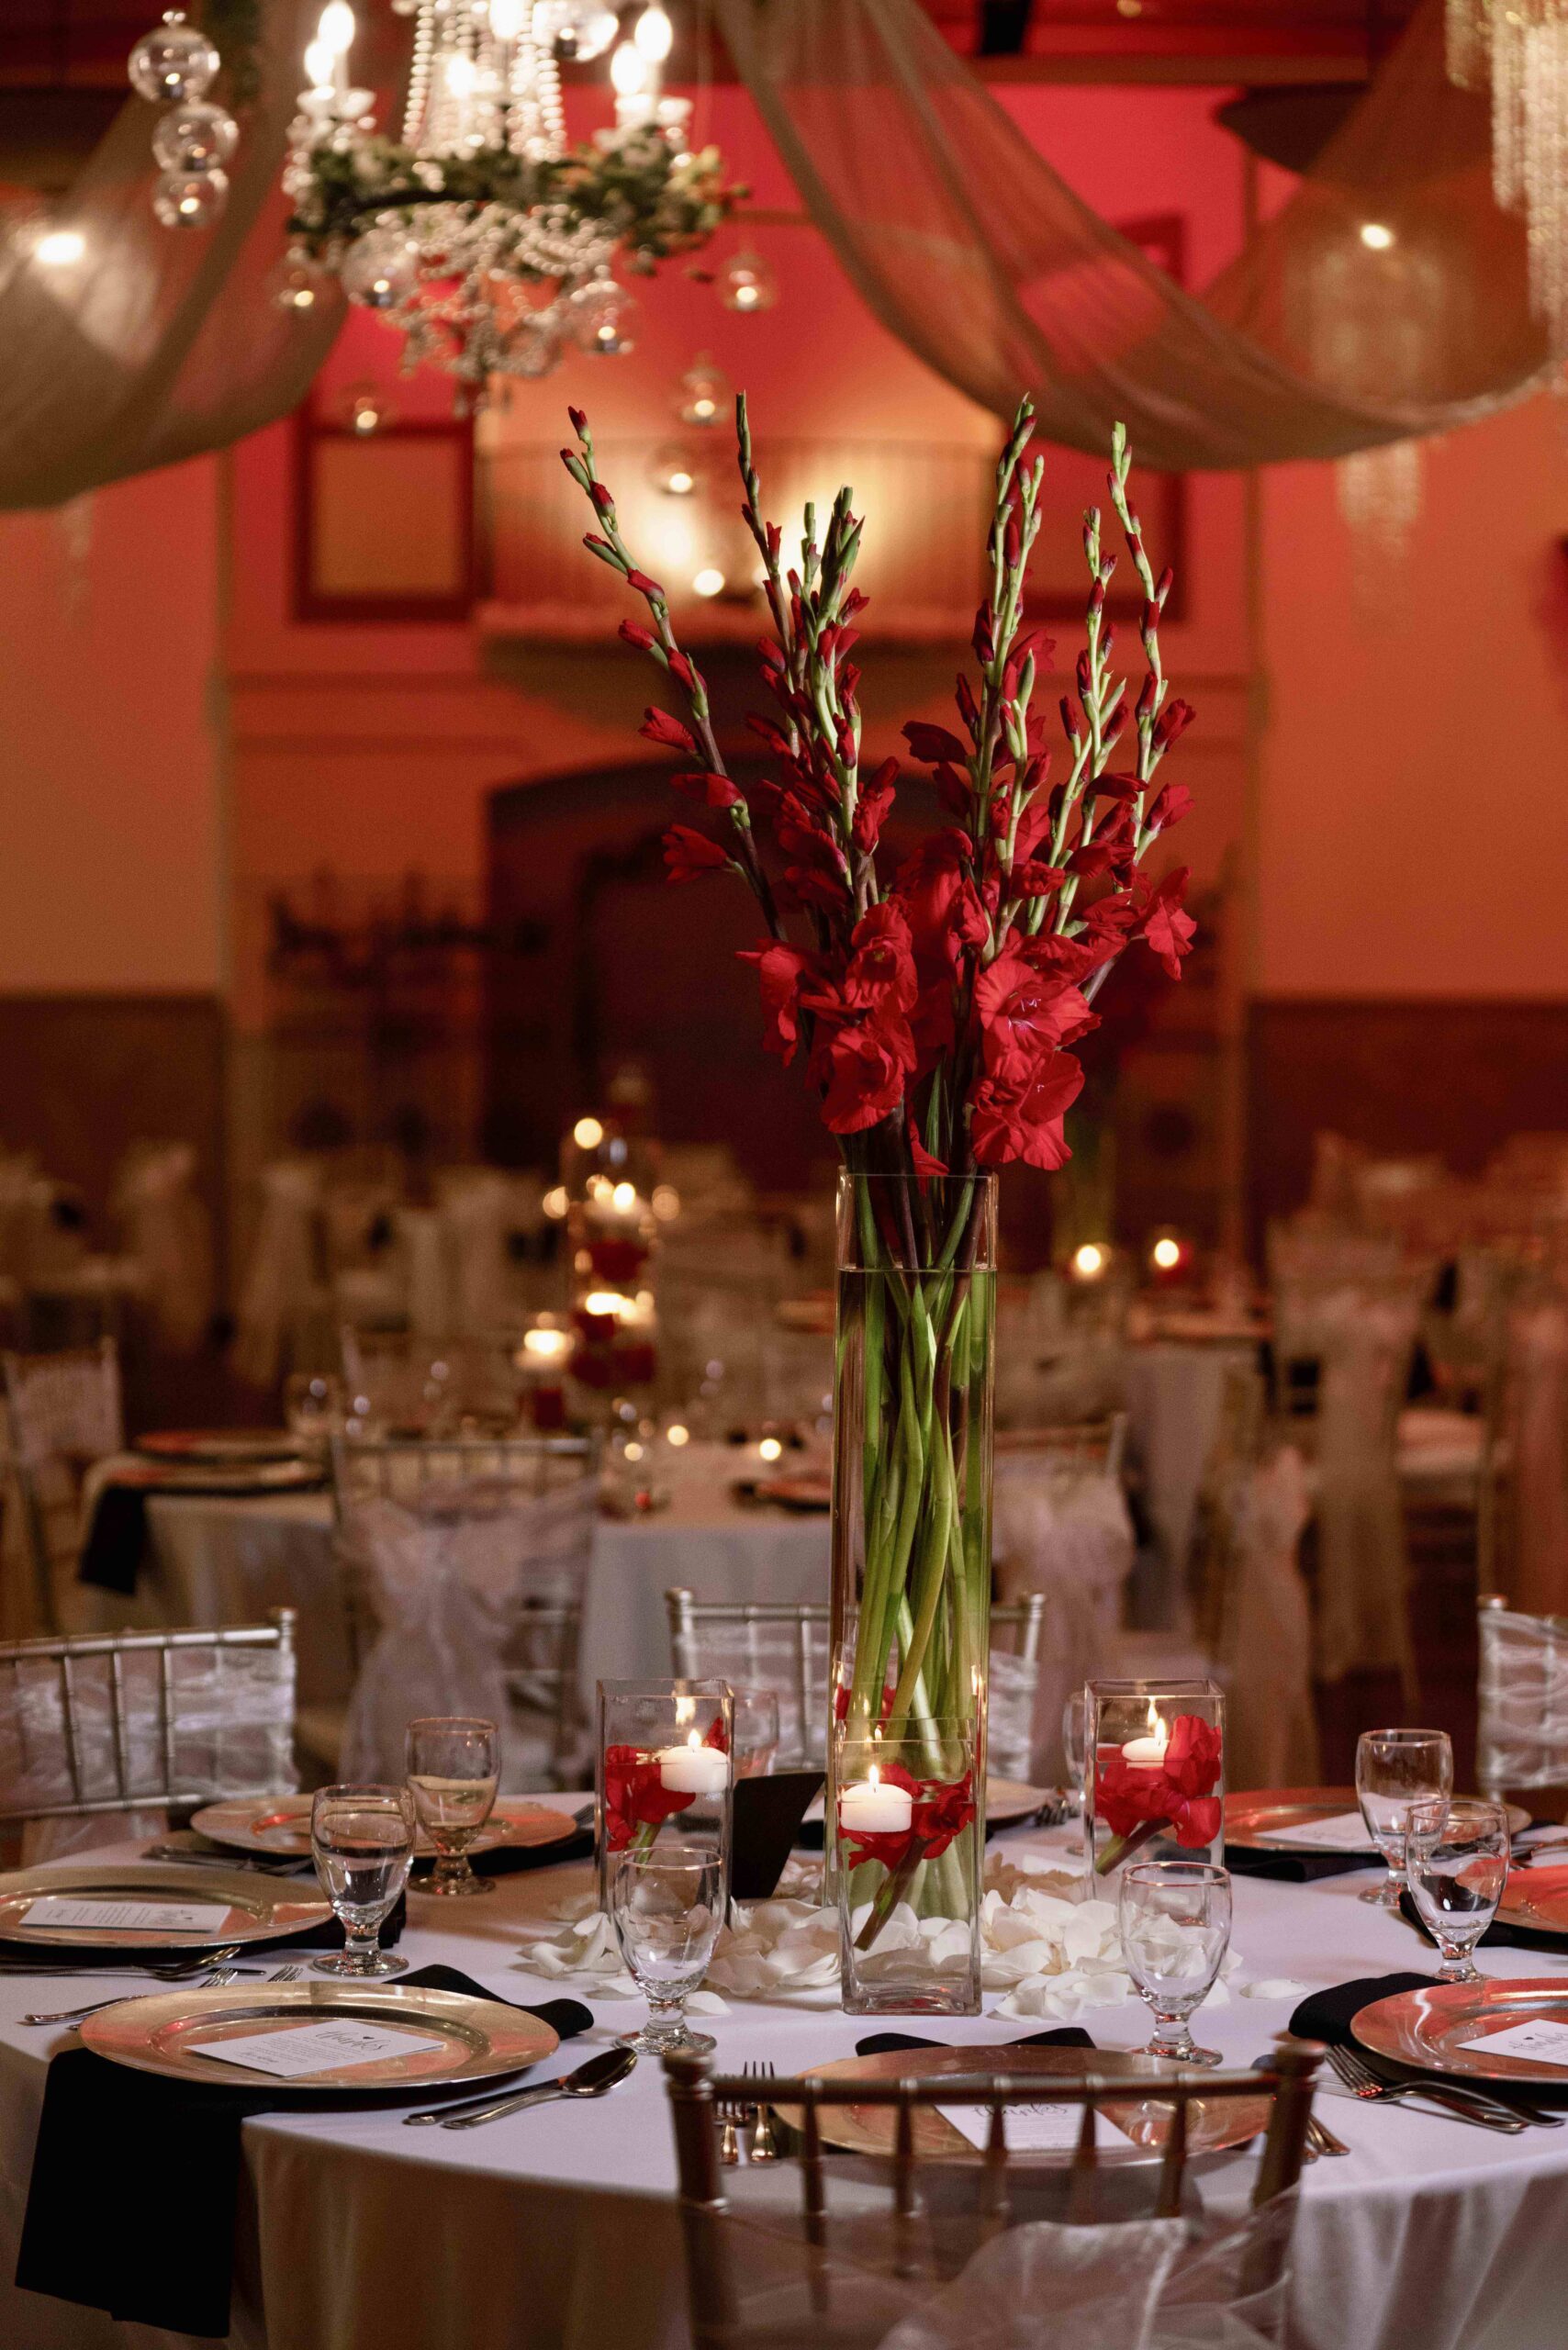 Red colored lighting creates a beautiful ambiance